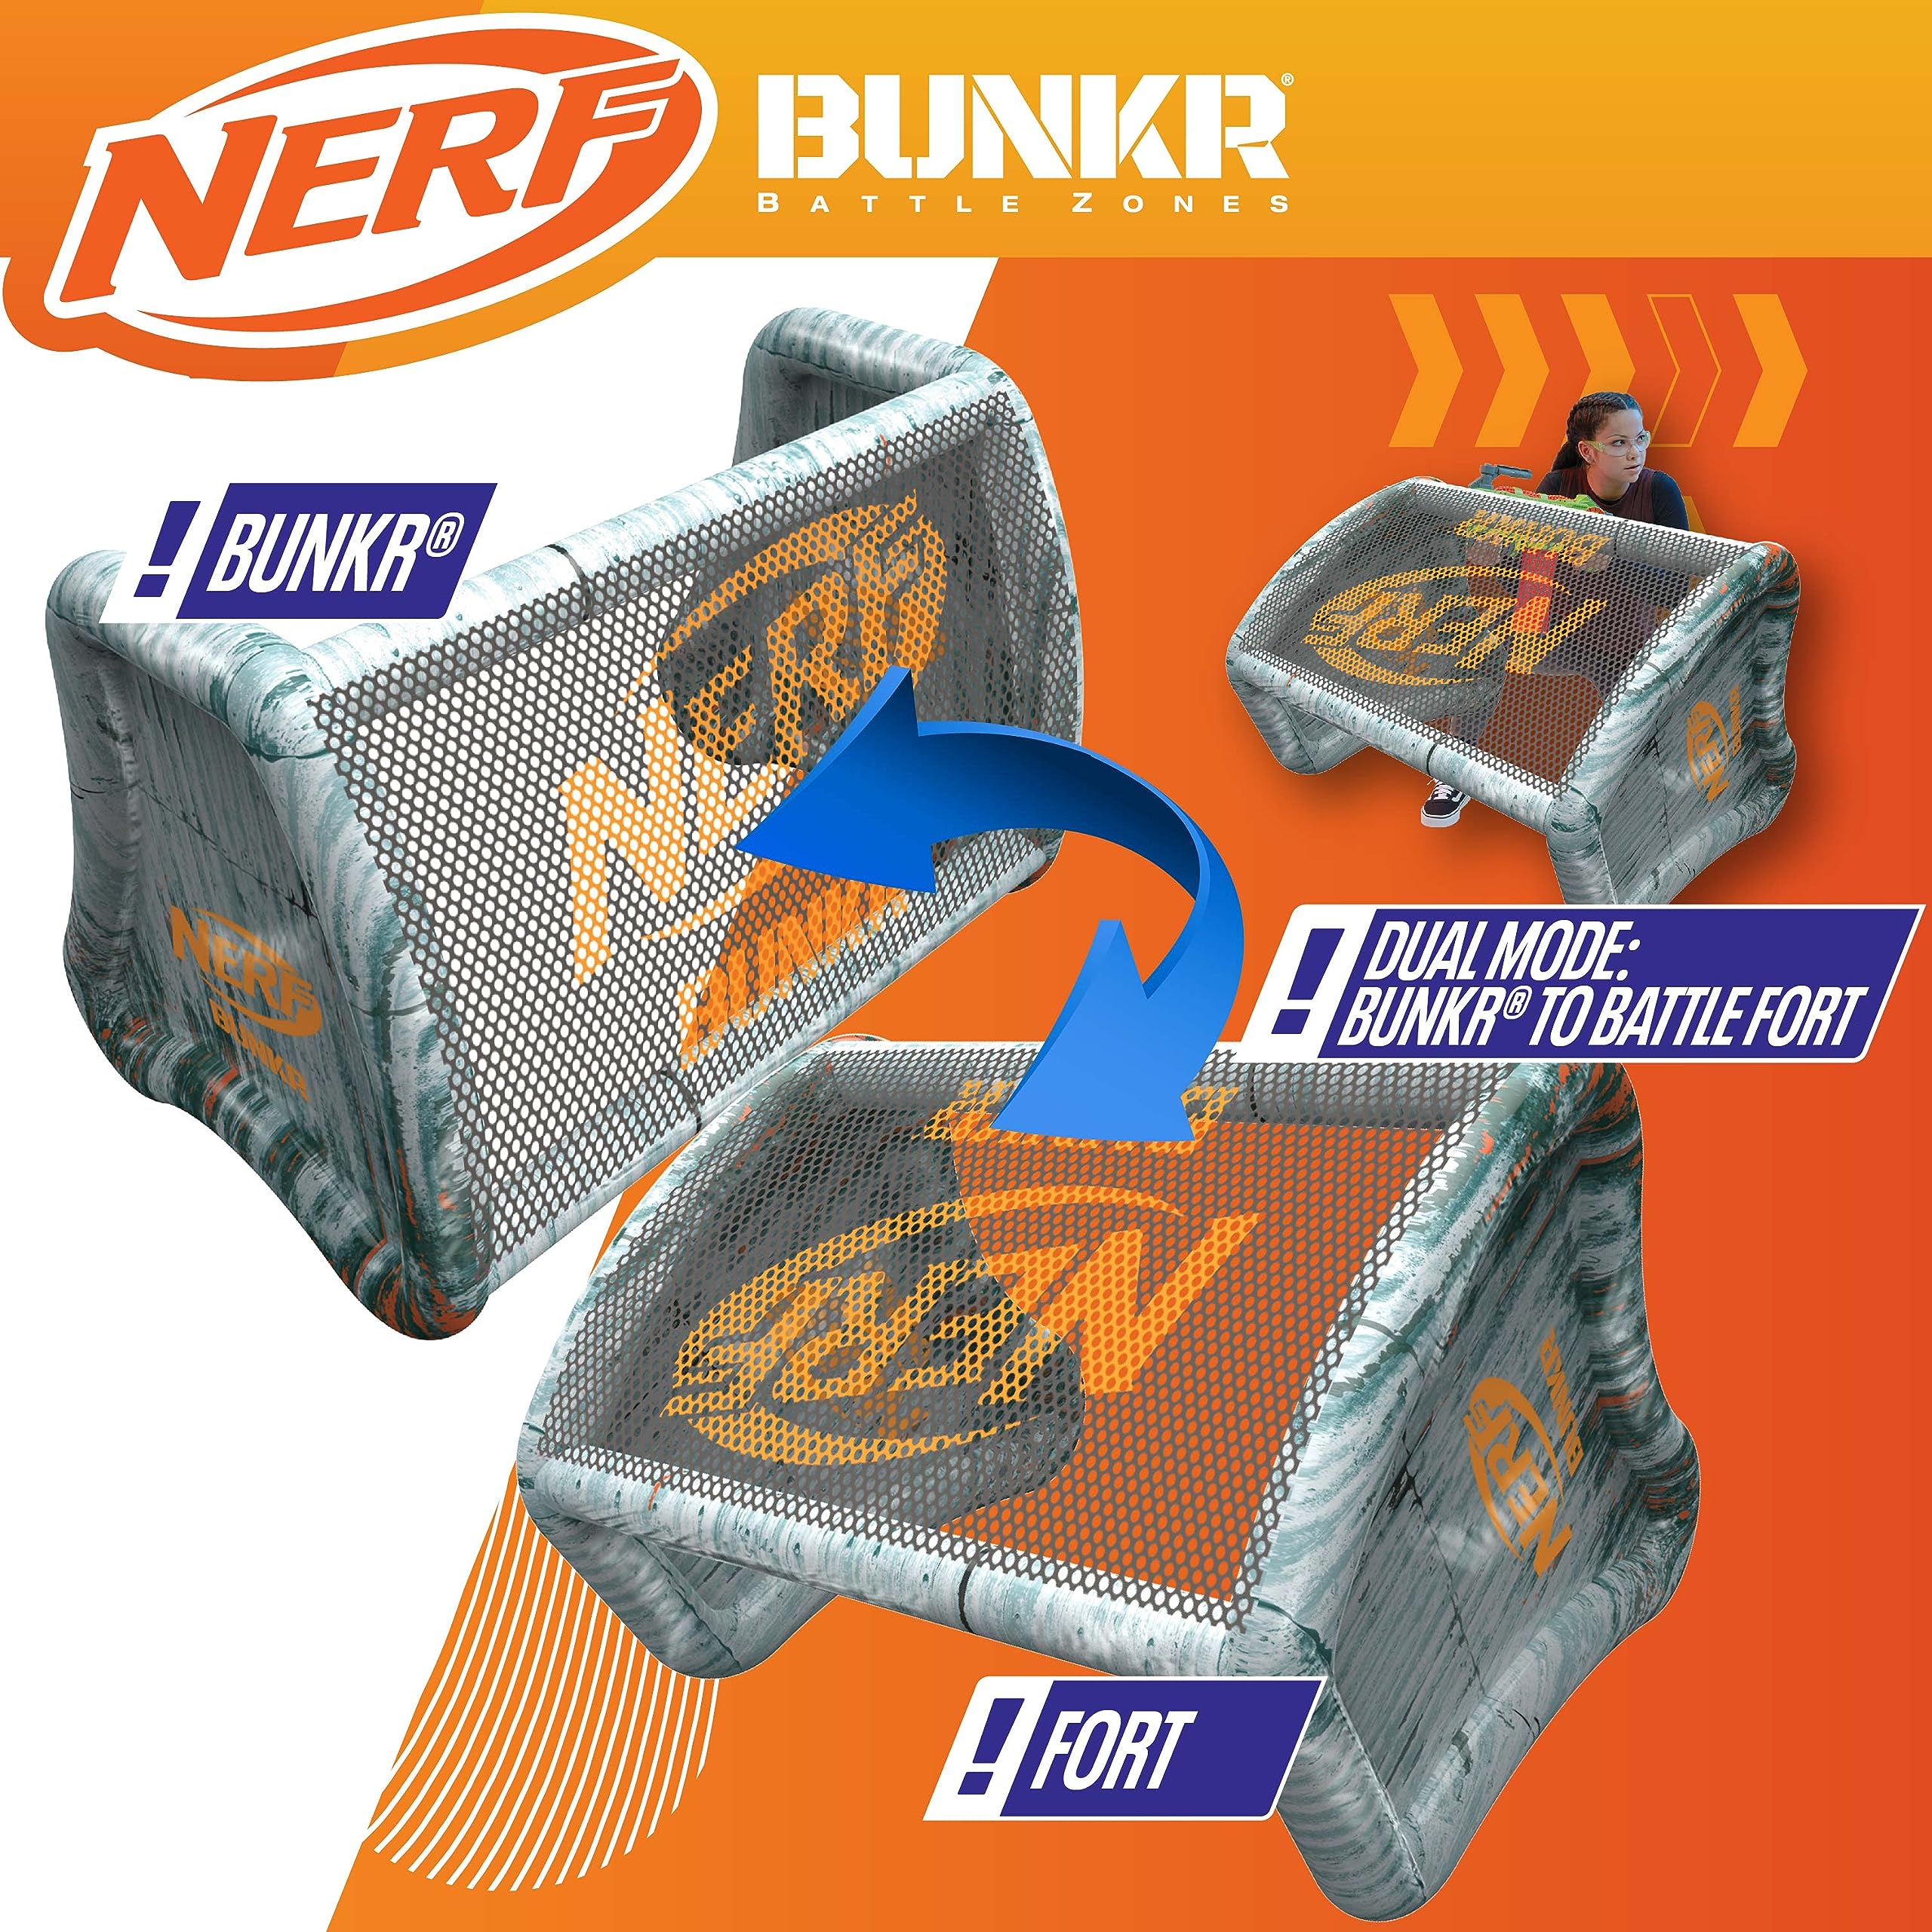 NERF BUNKR Officially Licensed Stadium Pack Inflatable Battlezone - 9 Piece Barricade Shield Bunker Set - Perfect for NERF Party NERF War